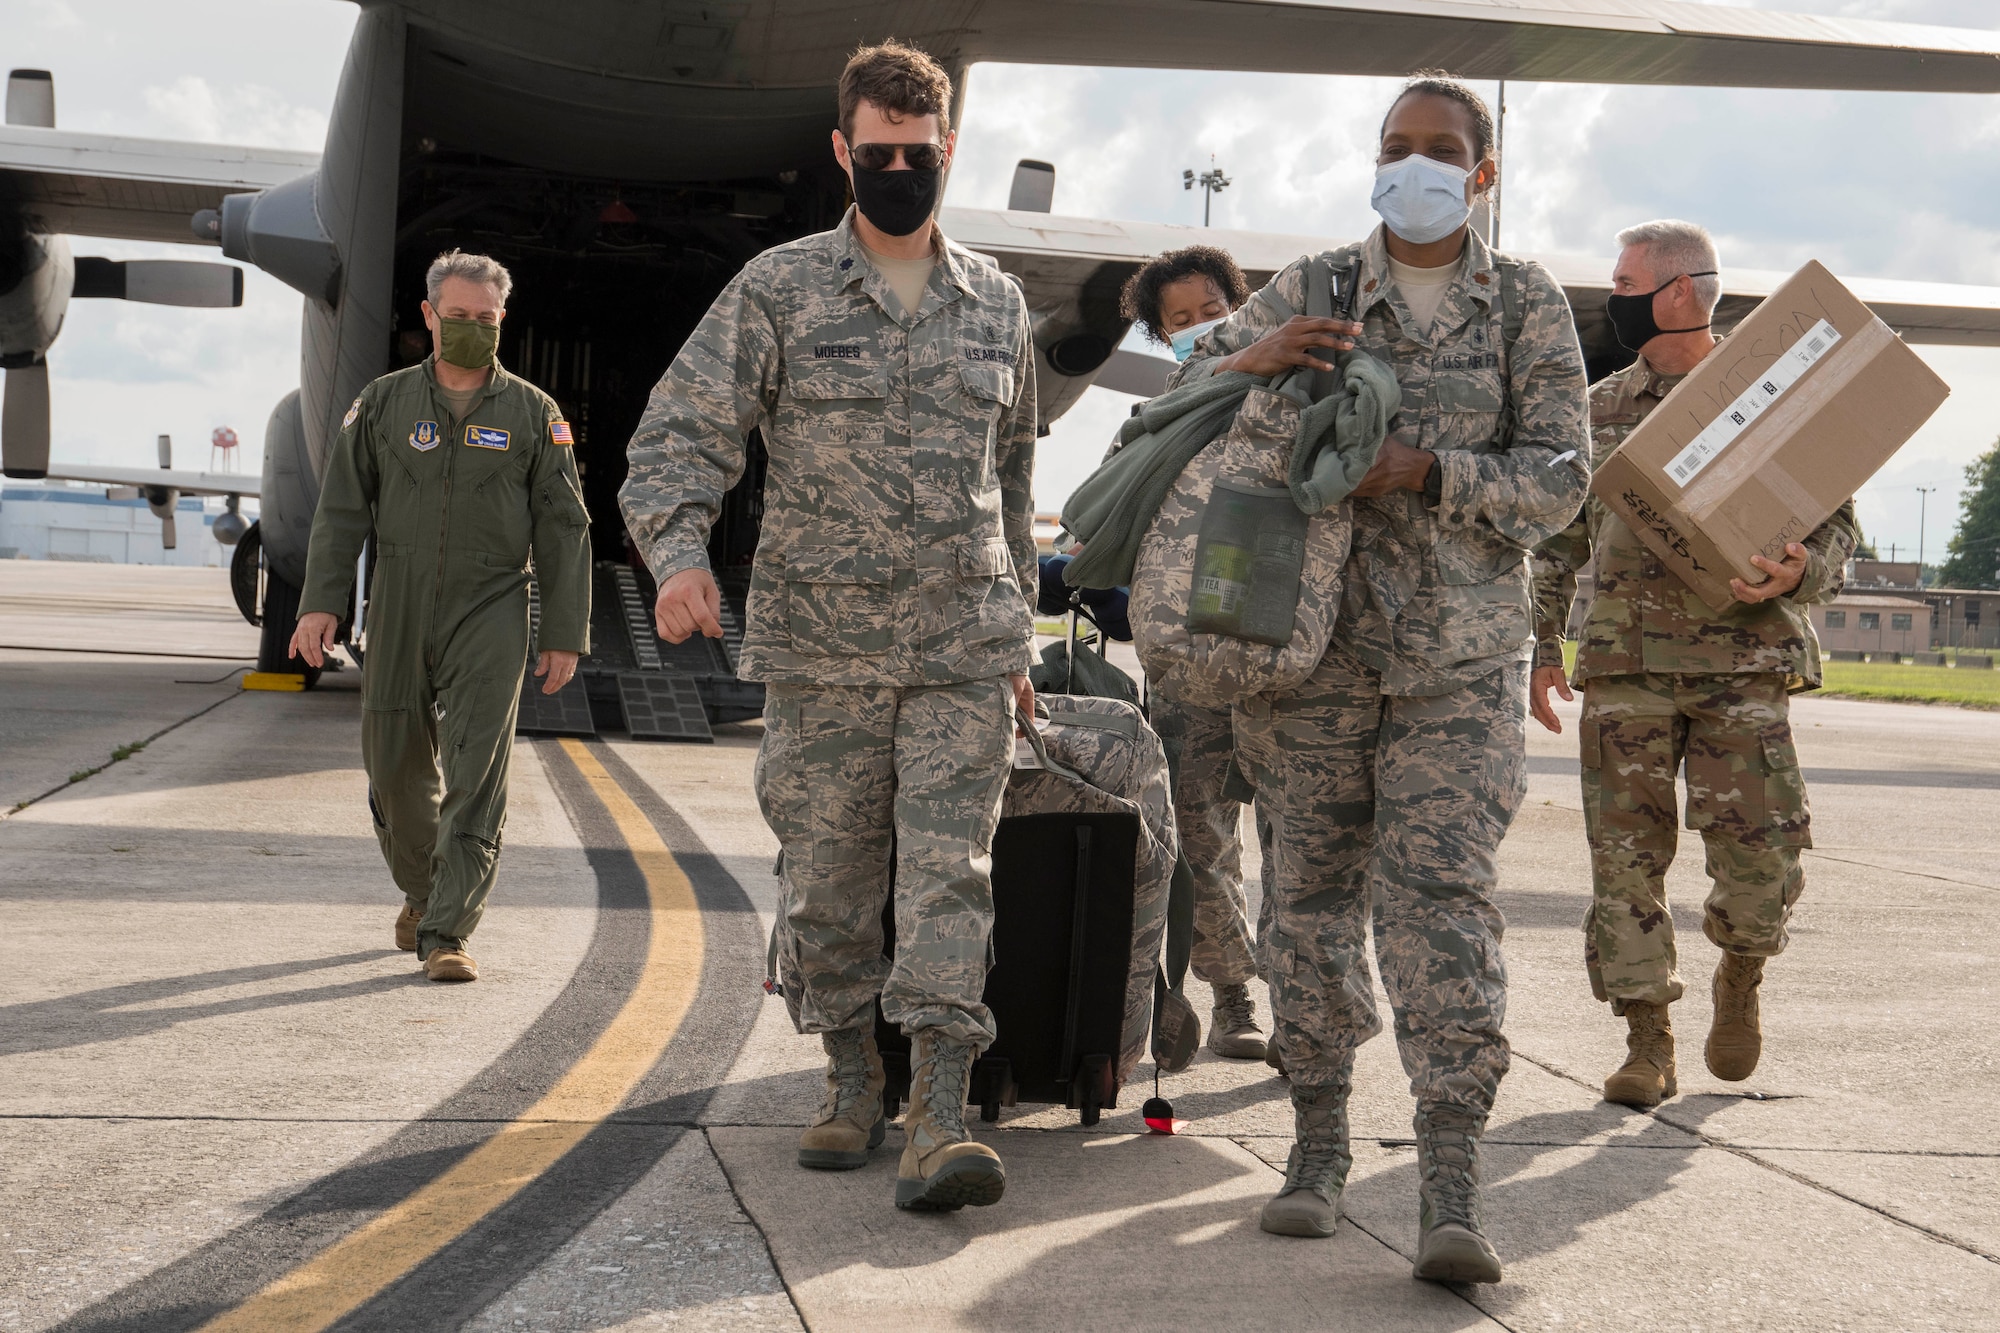 Nurses from the 94th Aeromedical Staging Squadron and members of the greeting party, including Col. Craig McPike, 94th Airlift Wing commander, left, depart a C-130H3 Hercules on the flightline at Dobbins Air Reserve Base, Ga. May 28, 2020. Four nurses from Dobbins mobilized to the COVID-19 frontlines in New York City as part of the whole-of-government response to the pandemic. (U.S. Air Force photo/Andrew Park)